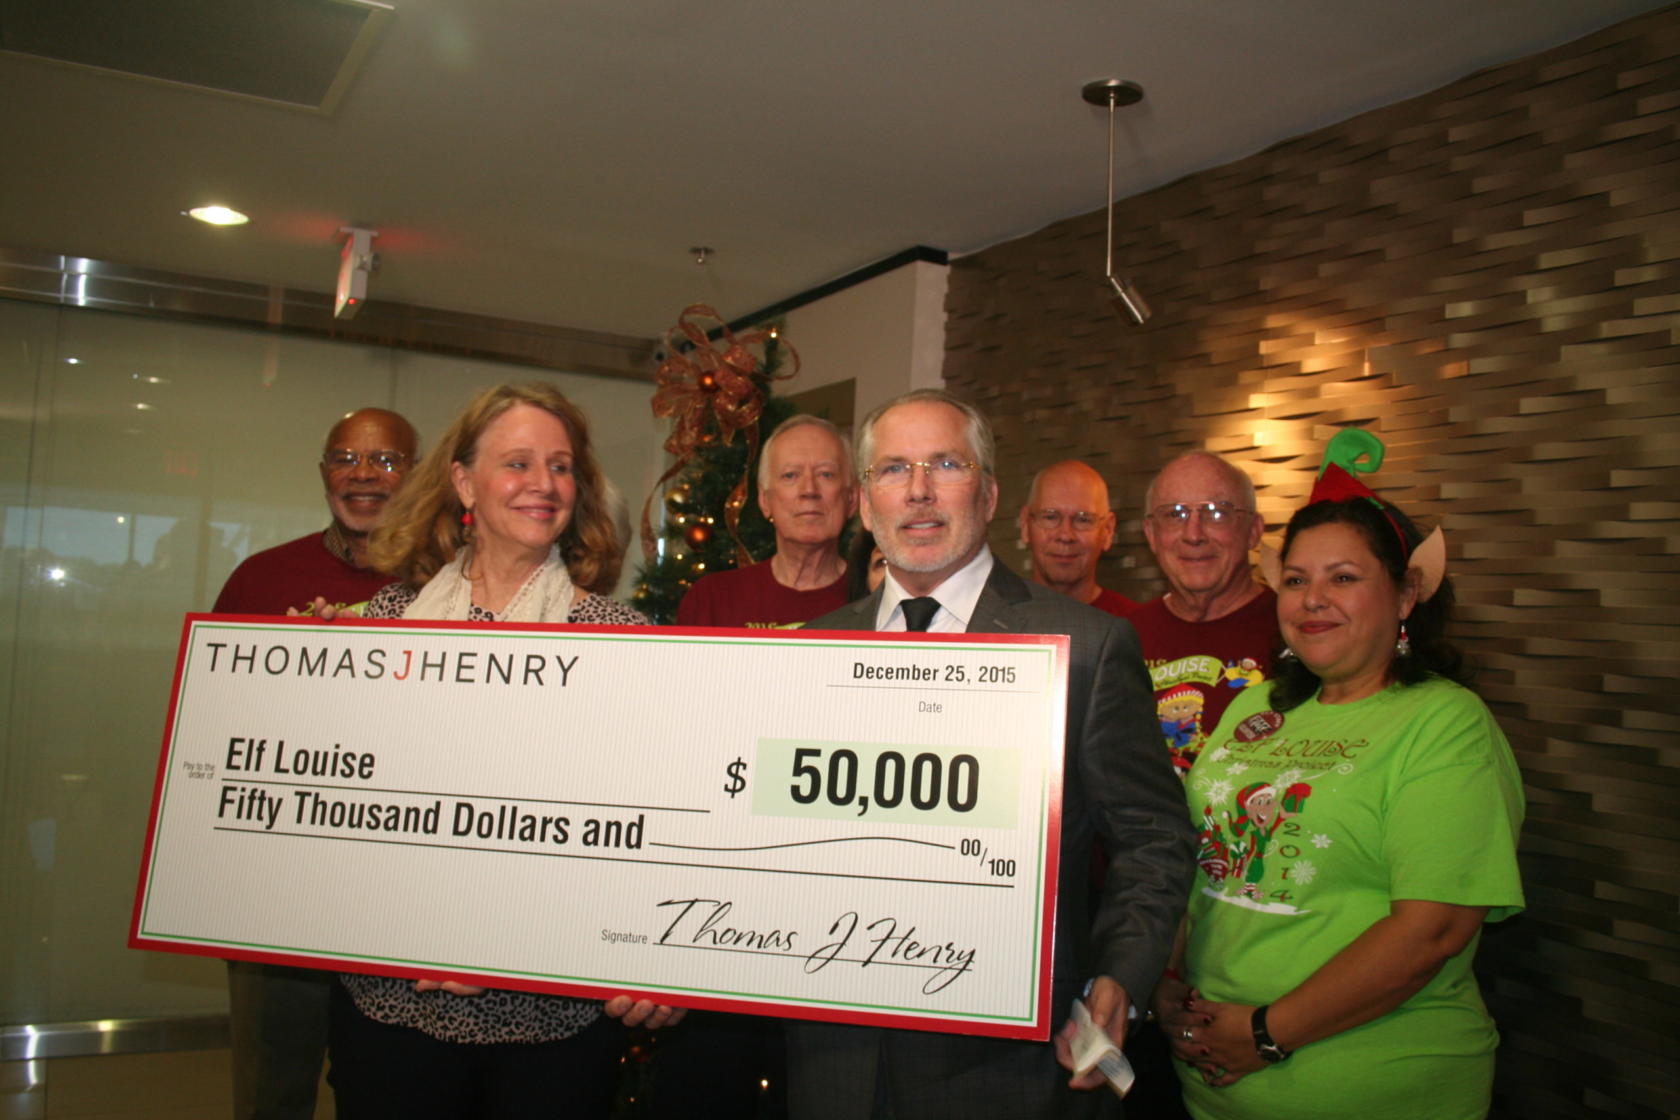 Thomas J .Henry holding a large check for $50,000 for Elf Louise